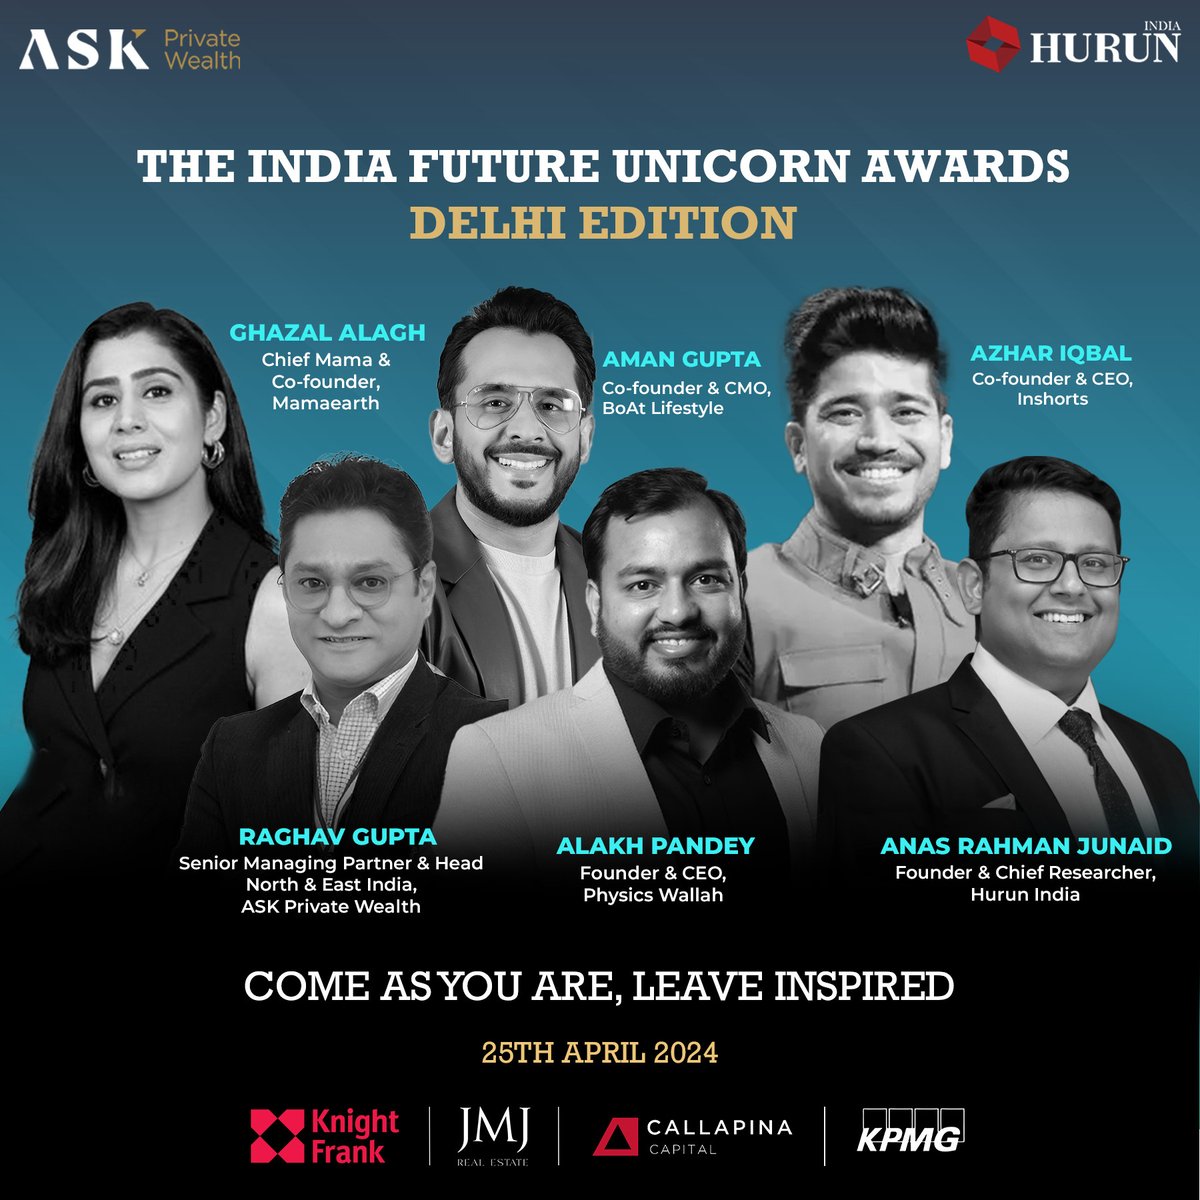 The countdown is on! Just one more day until the much awaited India Future Unicorn Awards - The Delhi Edition!

#IndiaFutureUnicornAwardsDelhi #DelhiStartups #InnovationIndia #SupportIndianEntrepreneurs #TheFutureIsHere #StartupEcosystem
#MakeInIndia #BusinessAwards #DelhiEvents